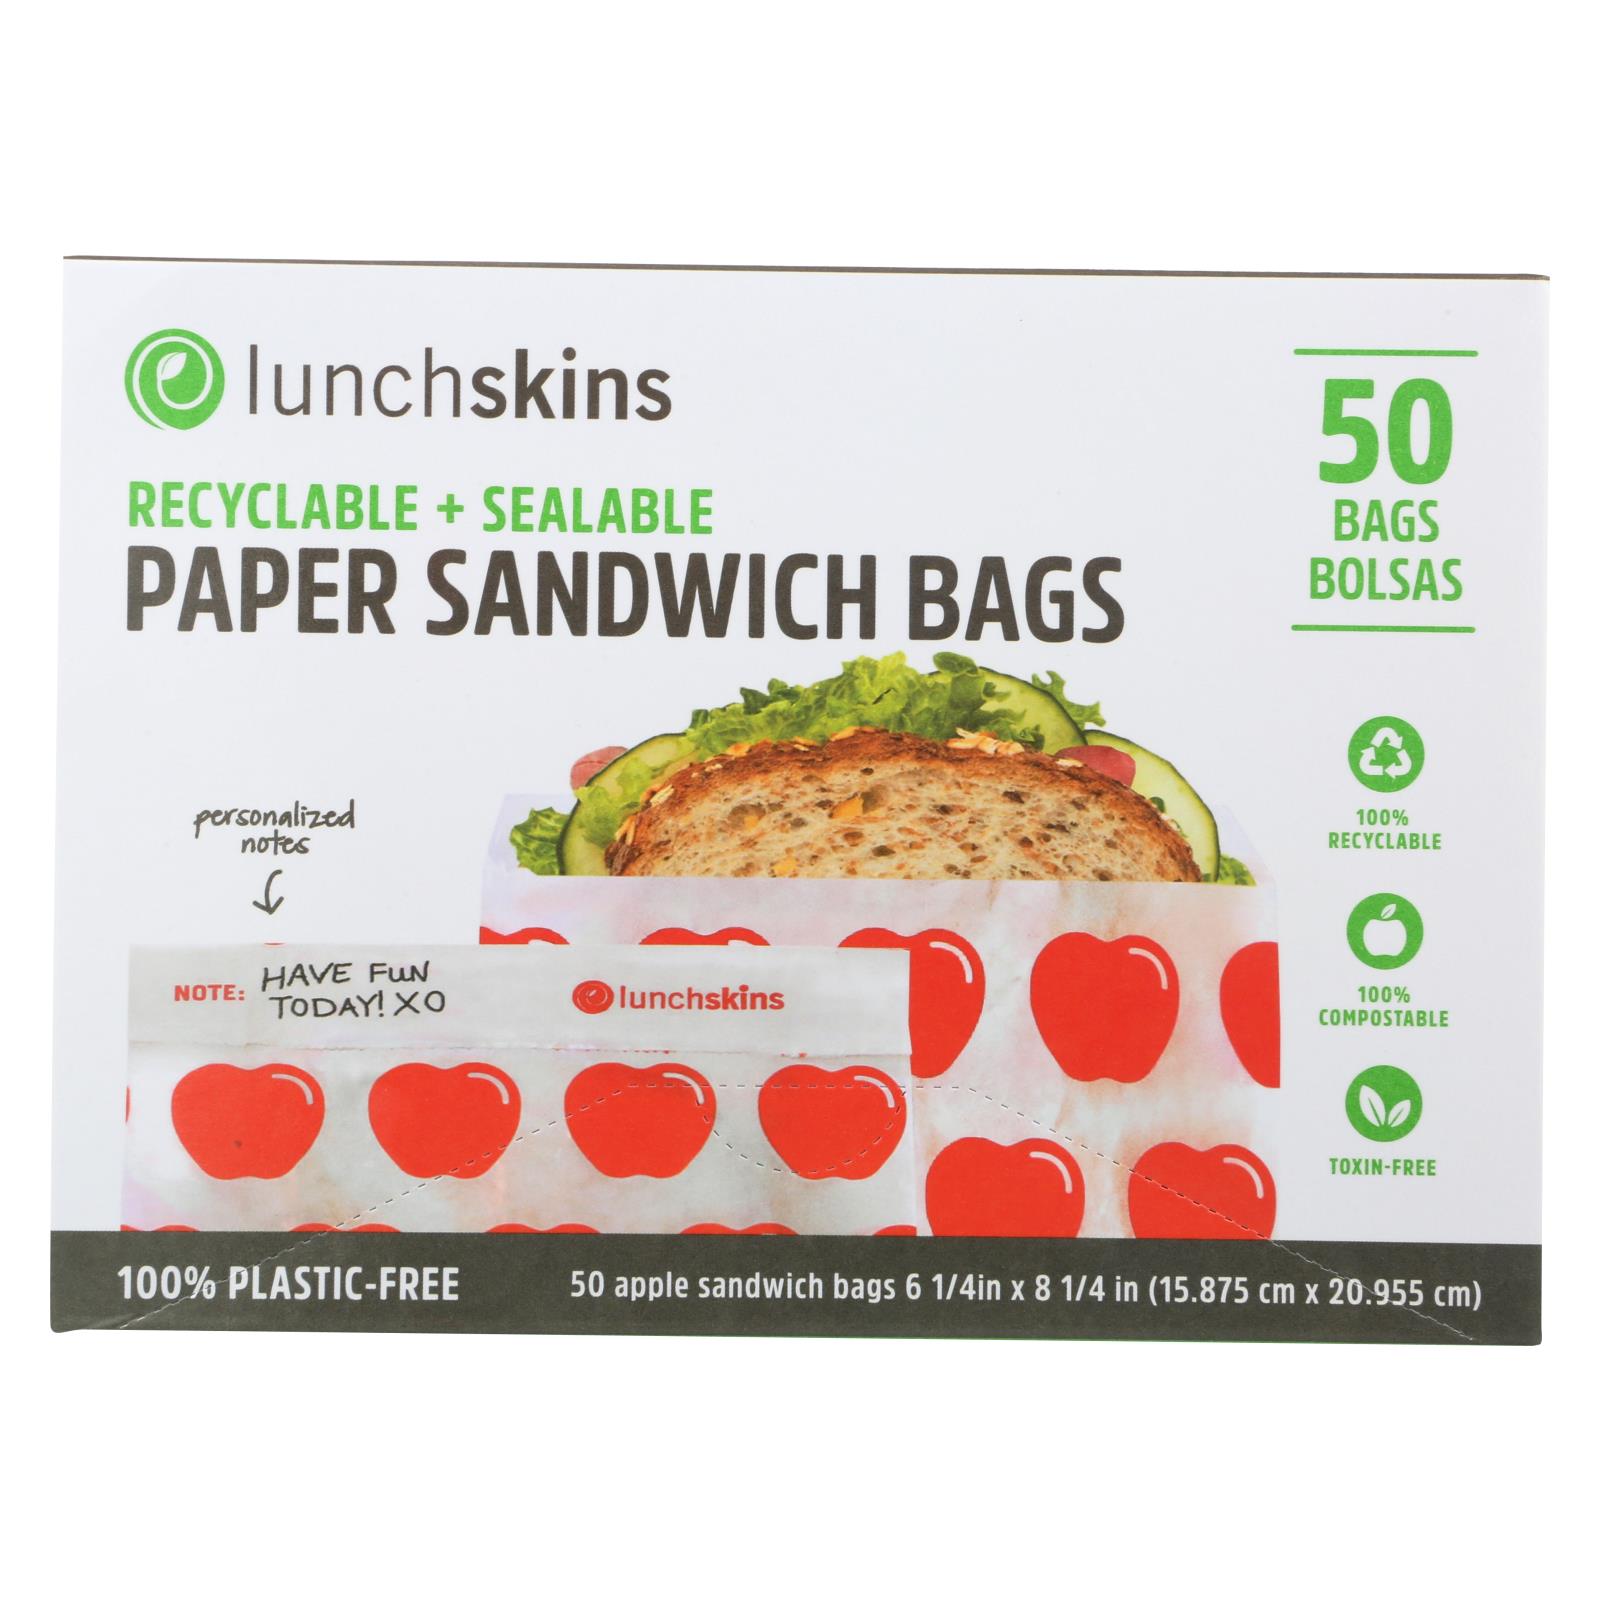 Lunchskins - Recyclable and Sealable Paper Sandwich Bags - Red Apple - 12개 묶음상품 - 50 Count